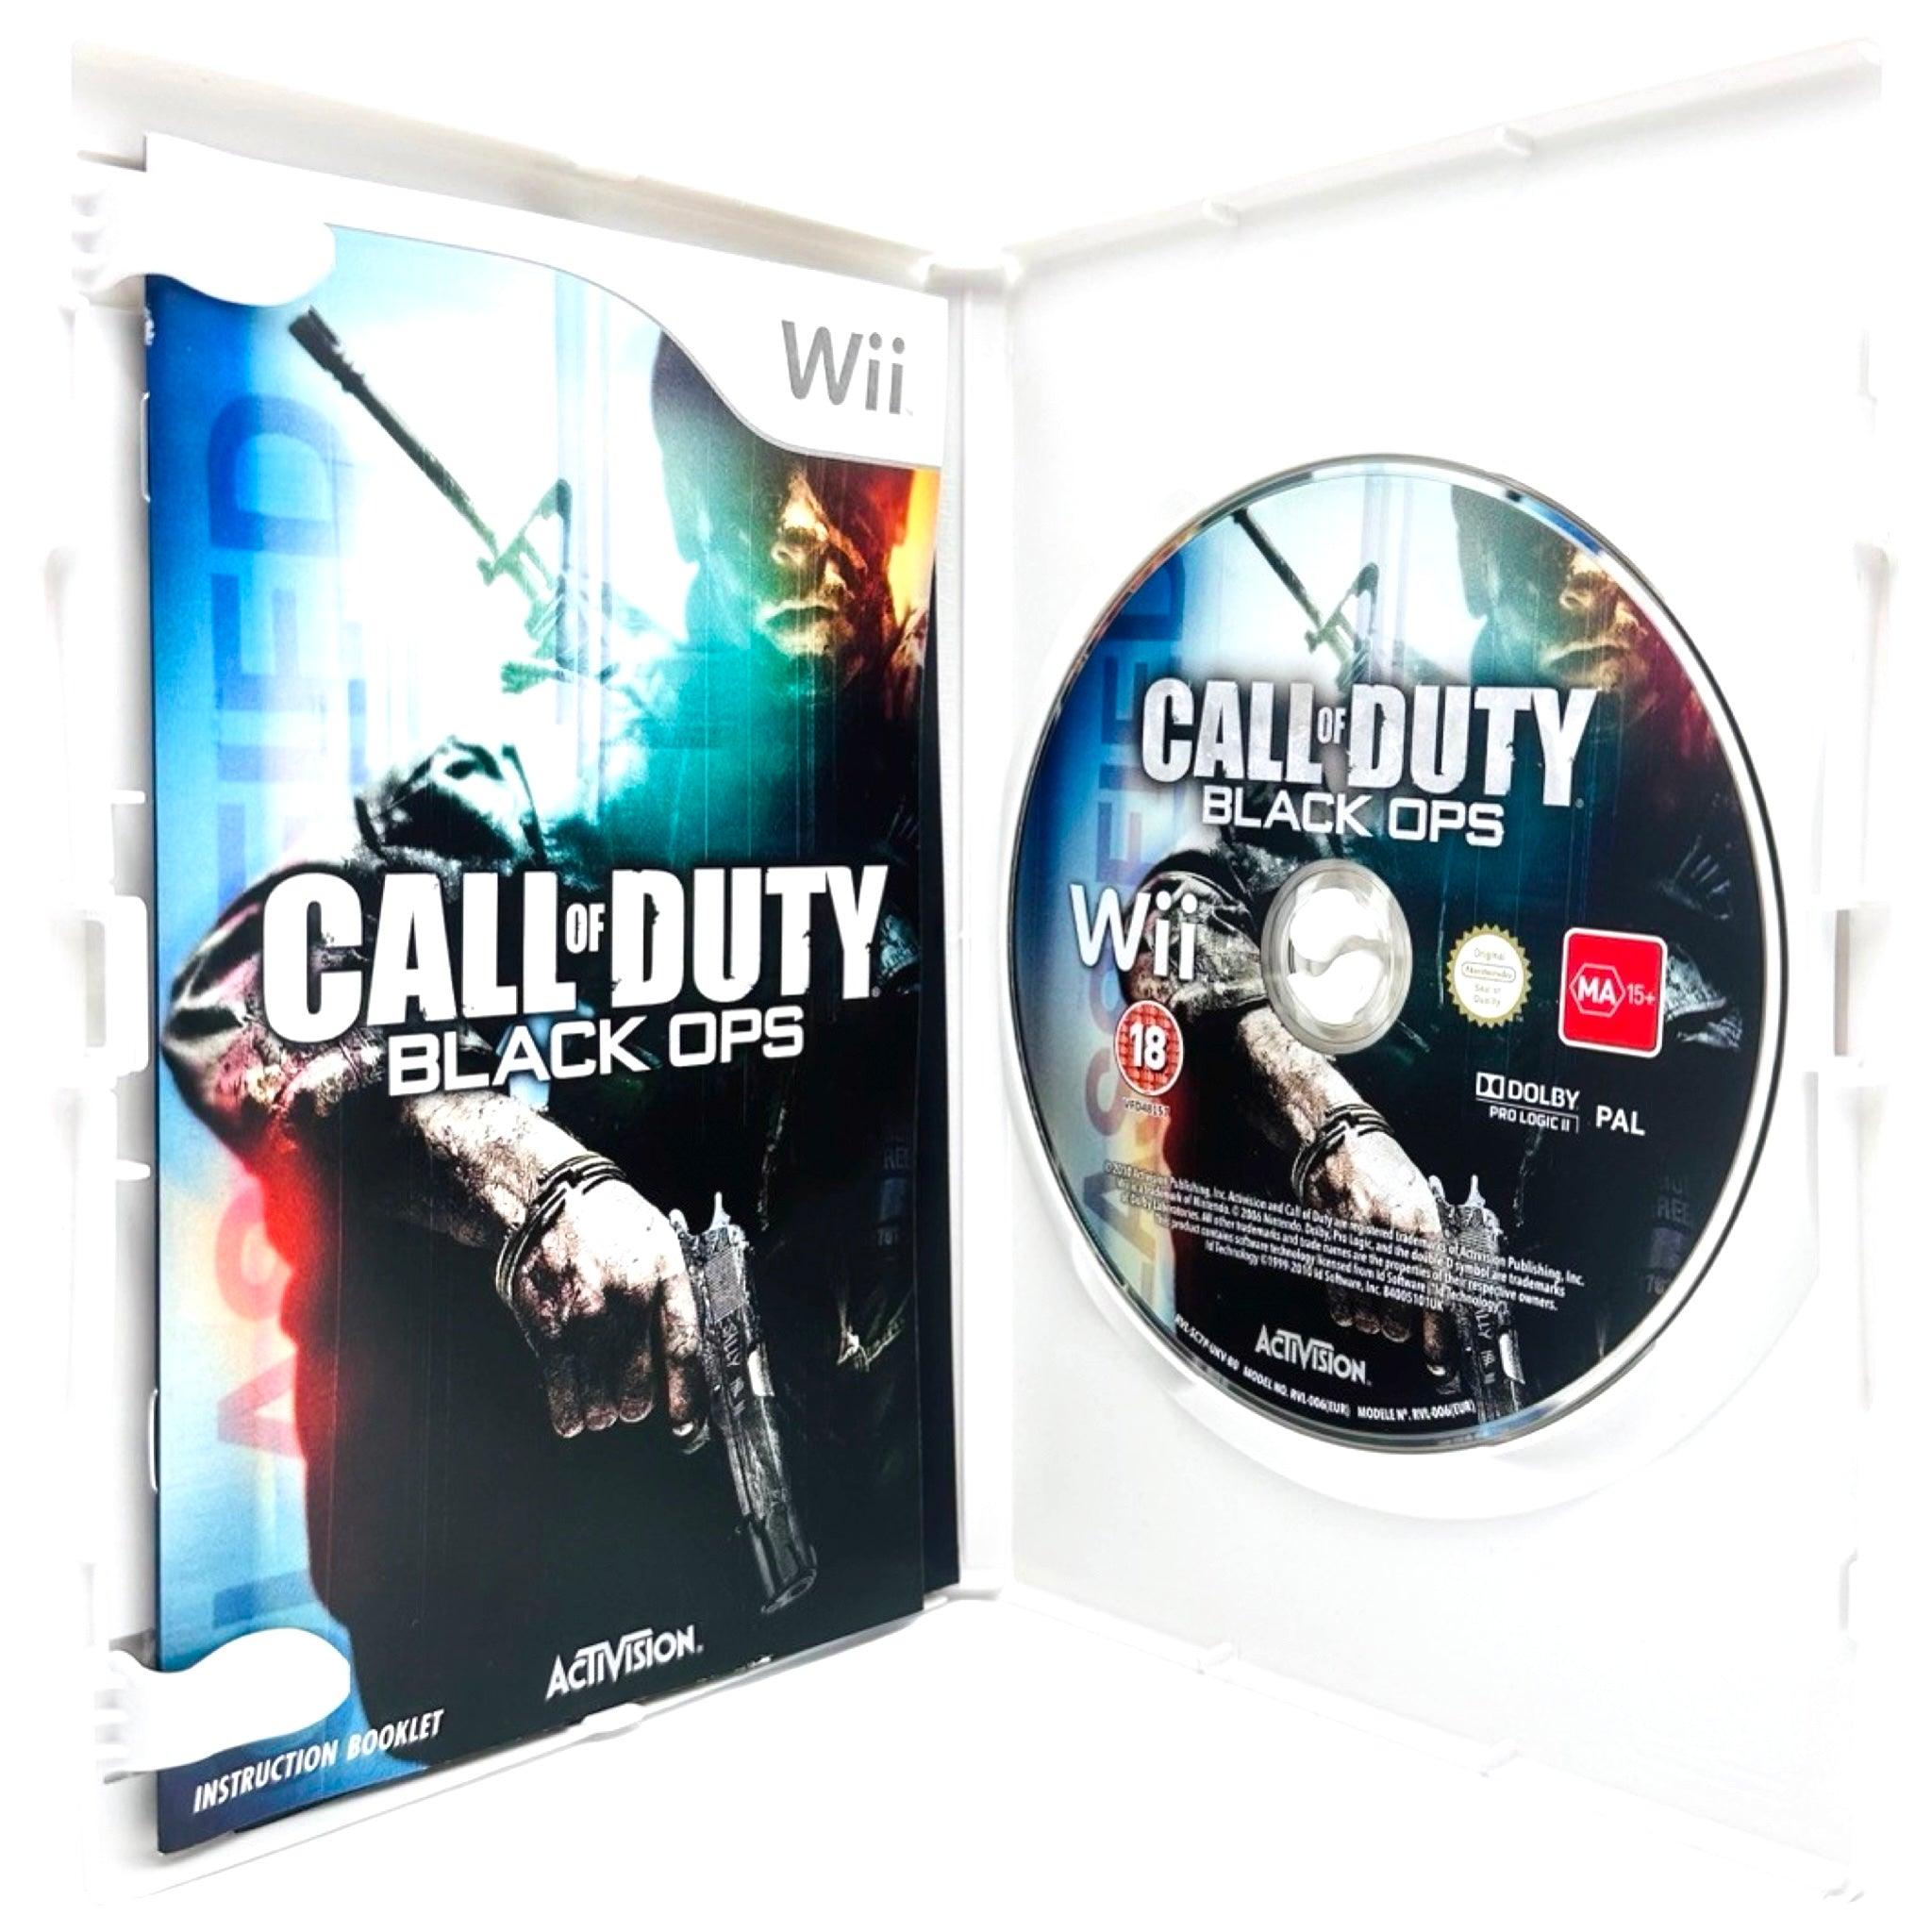 Wii: Call Of Duty: Black Ops - RetroGaming.no